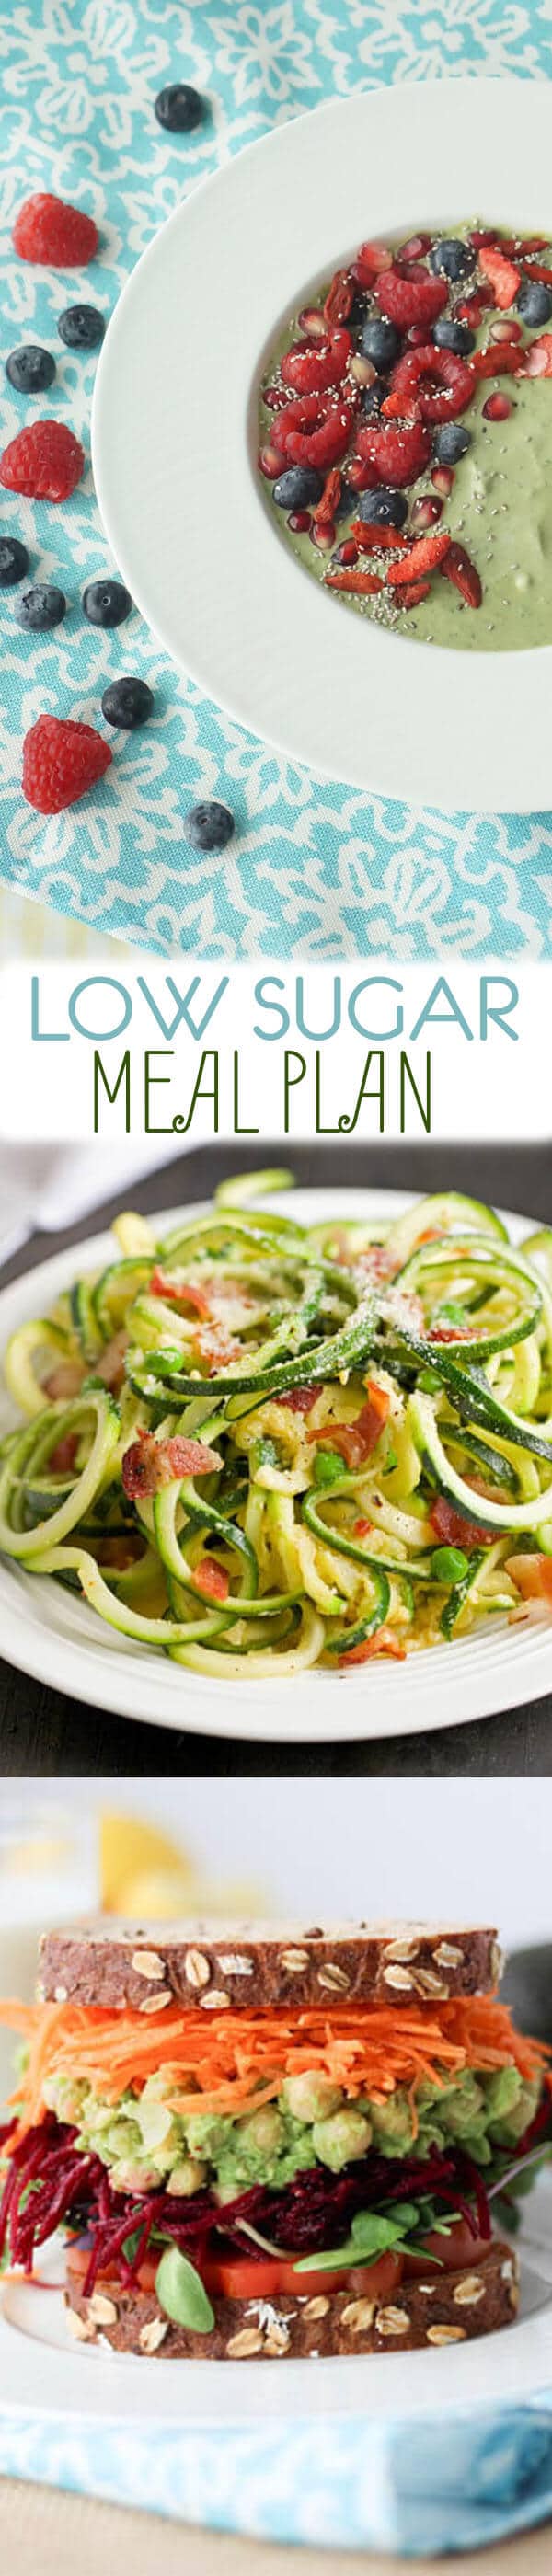 Pinterest image for a low sugar meal plan.